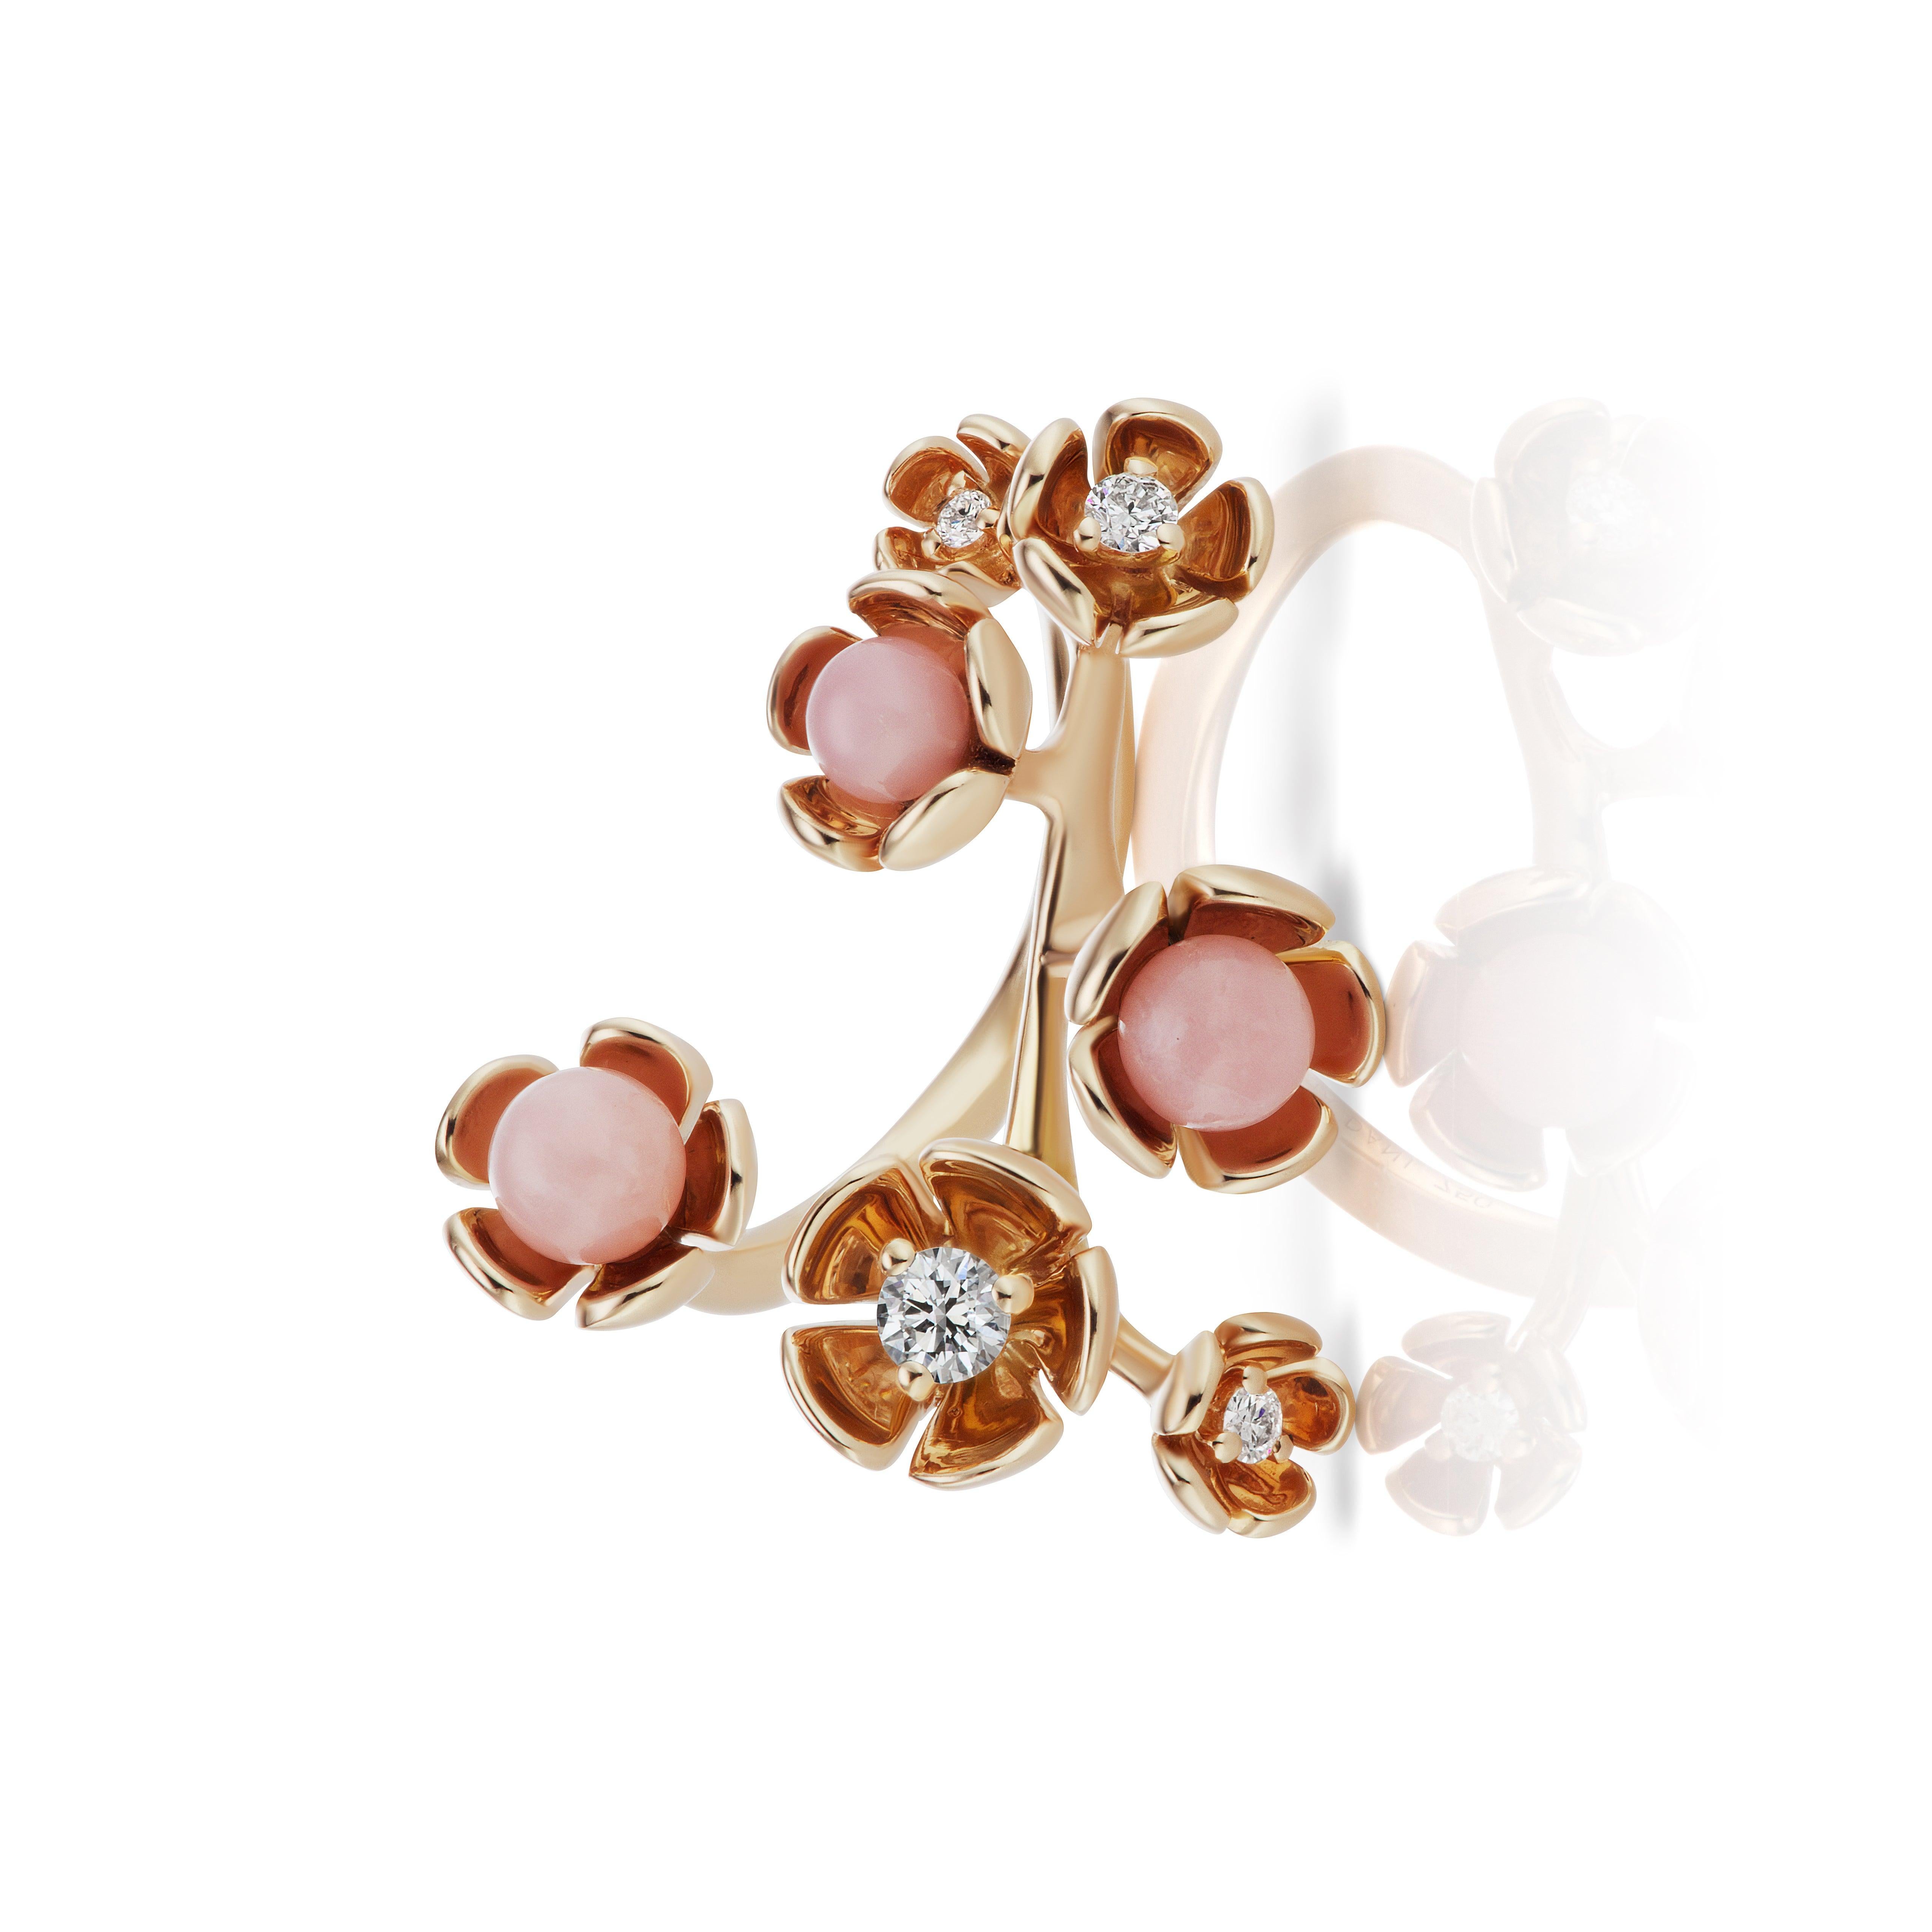 18K Rose Gold Vine Ring with Pink Opal and Diamond Accent.
0.10ct.
Size 5 and 6. 